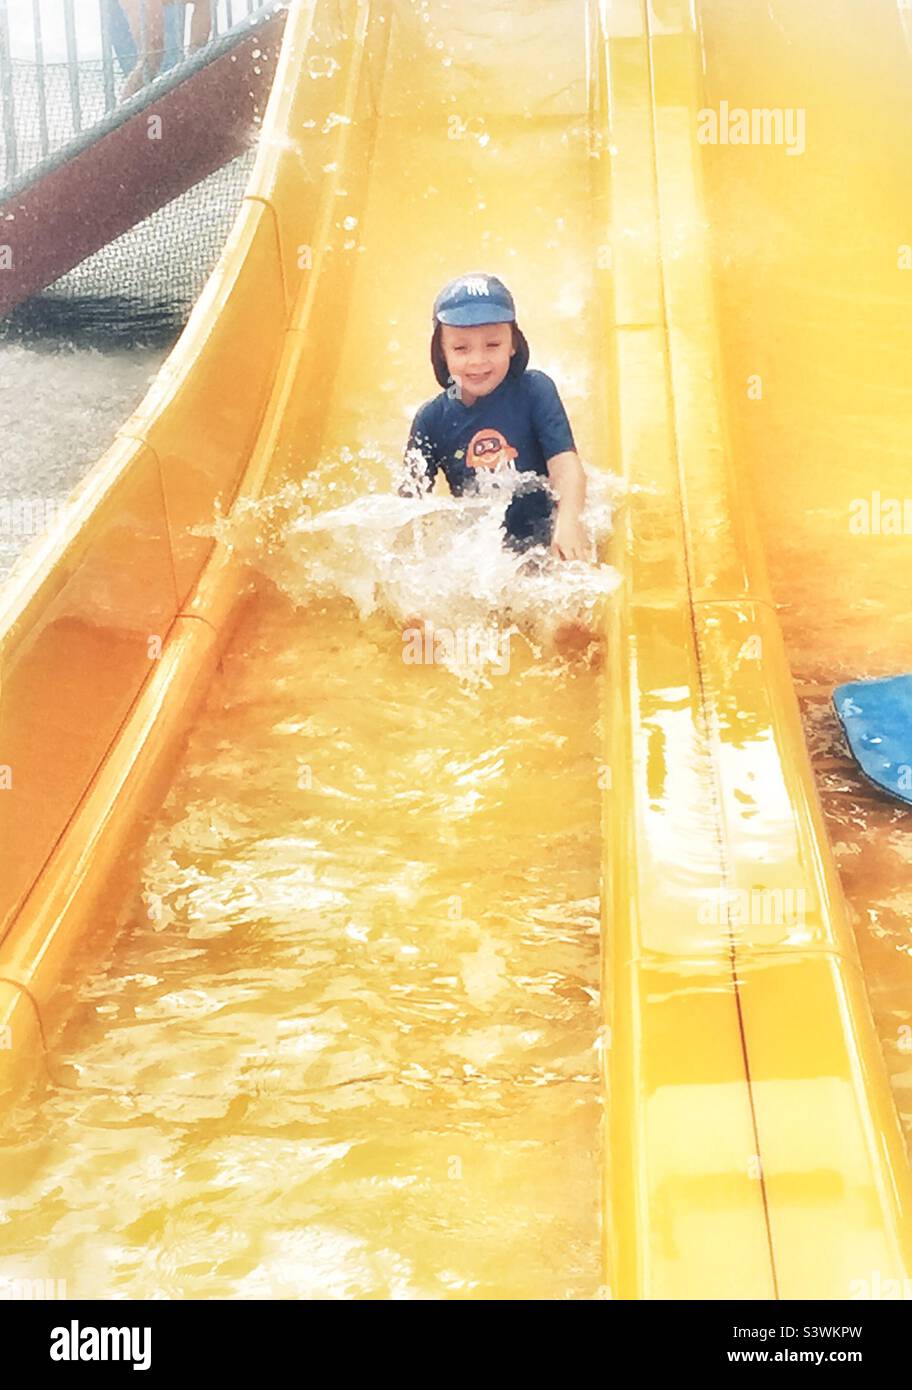 Child on a yellow water slide Stock Photo